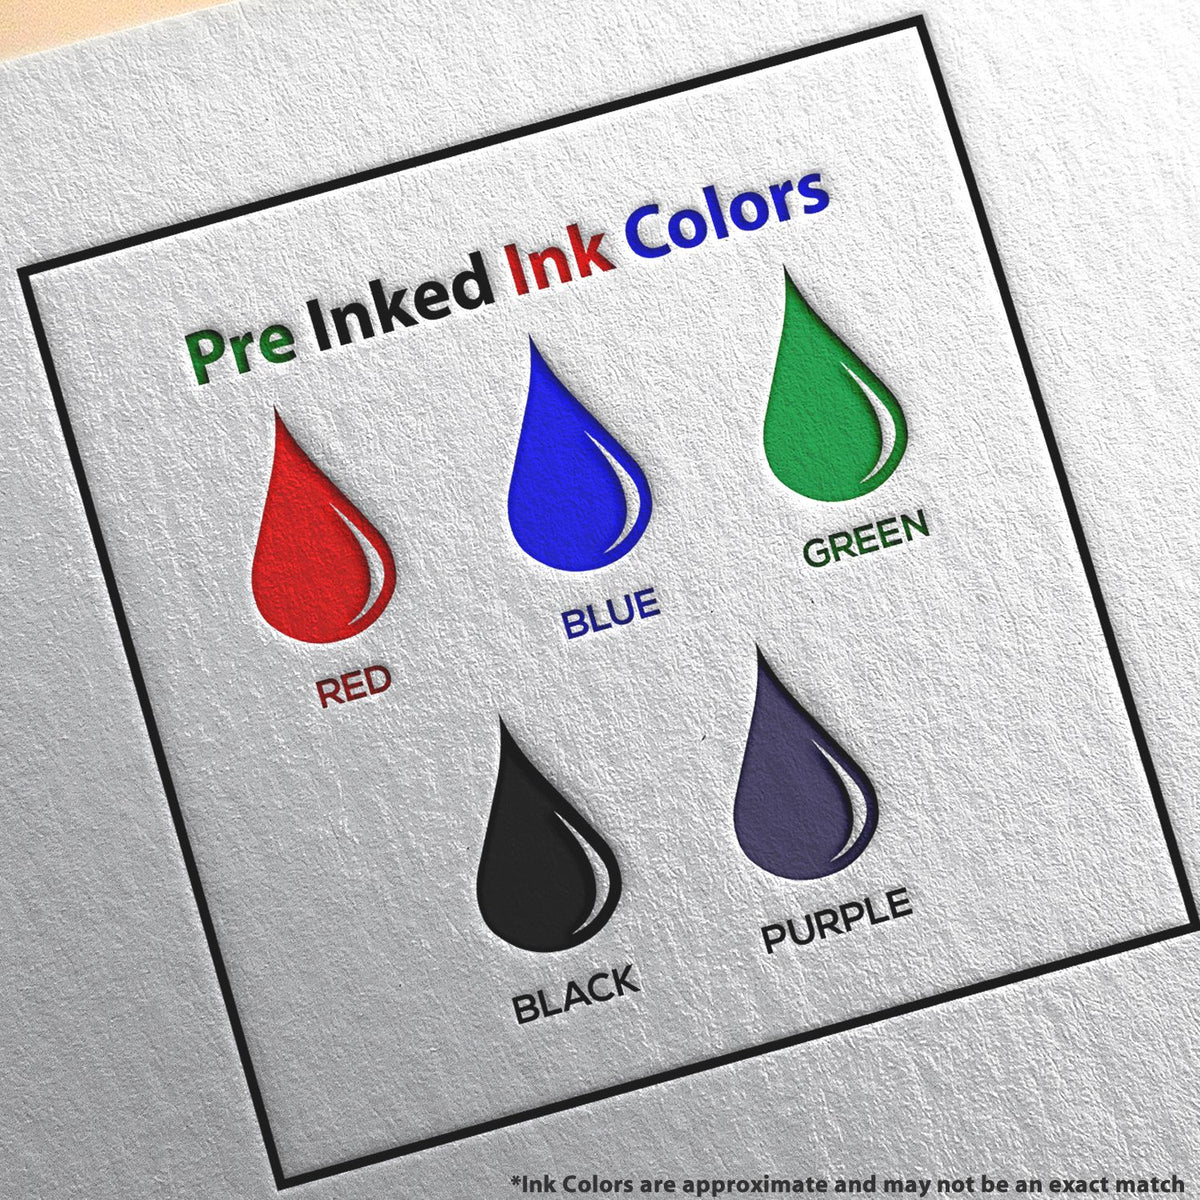 A picture showing the different ink colors or hues available for the MaxLight Premium Pre-Inked Pennsylvania Rectangular Notarial Stamp product.